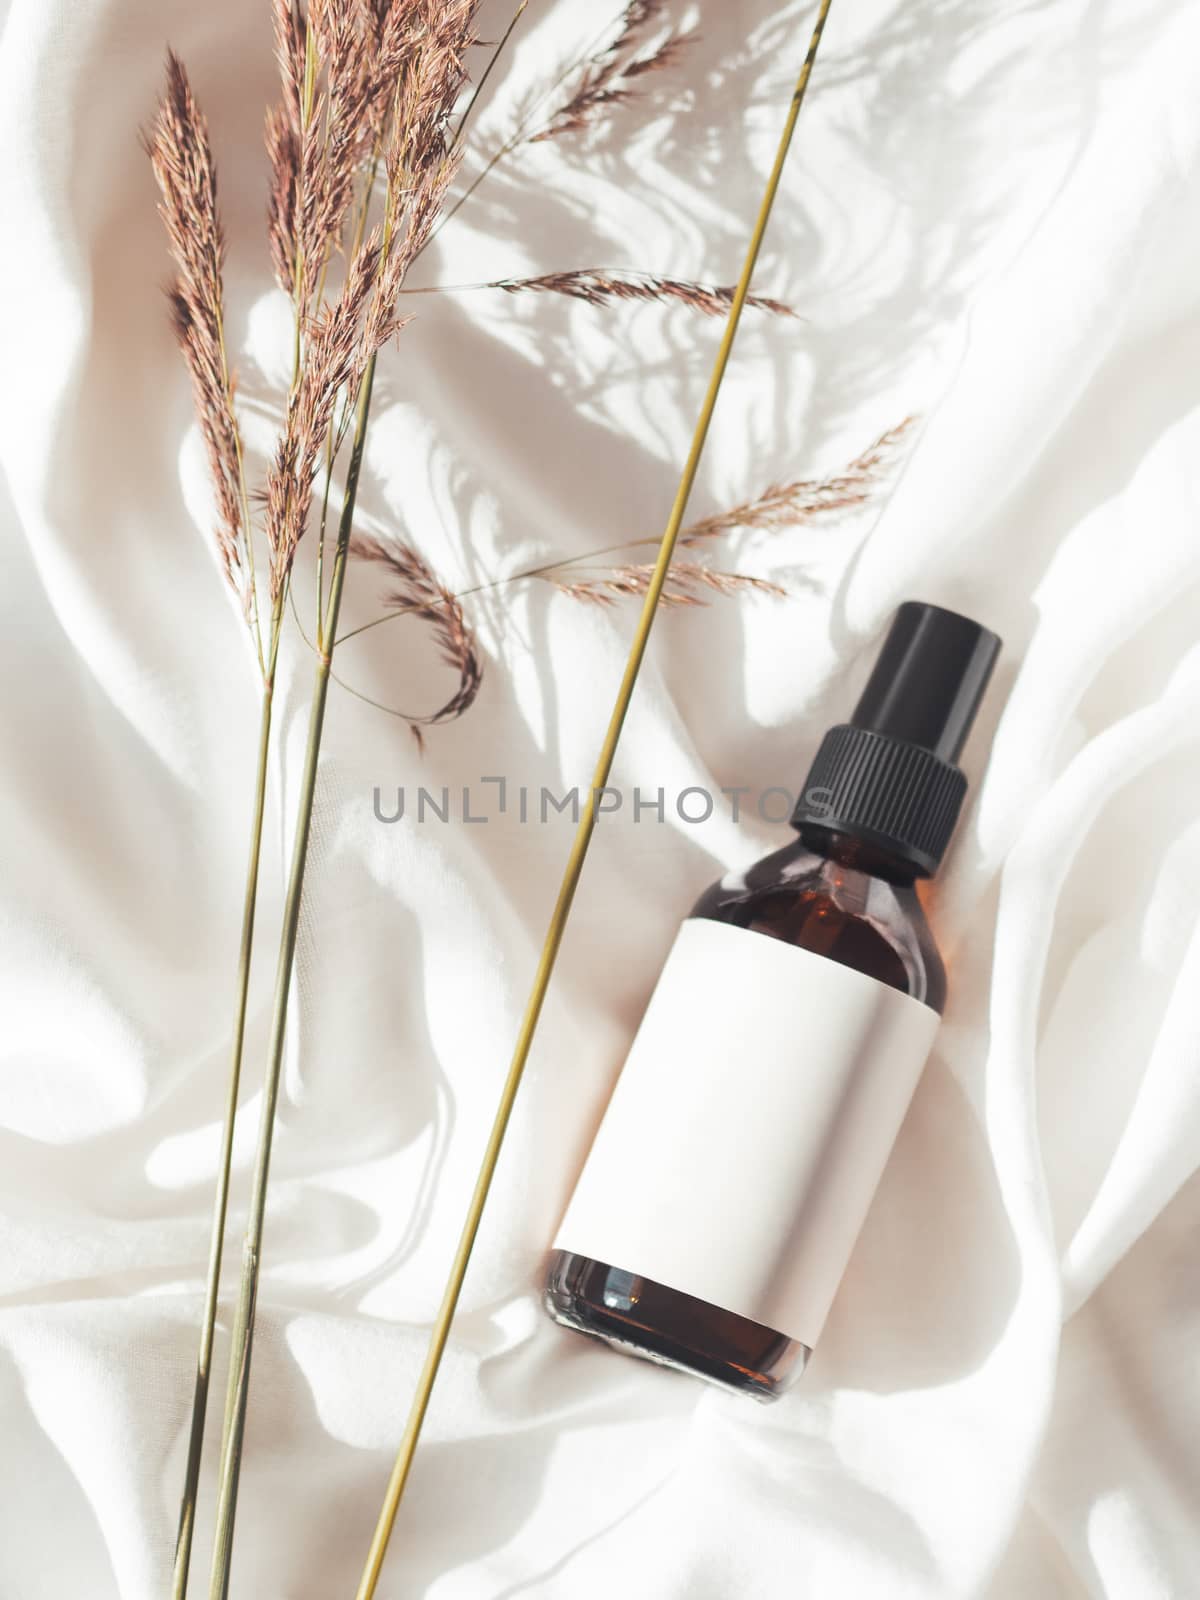 Concept of apothecary cosmetic. Herbs and brown glass bottle of essential oil in still life composition on crumpled white fabric. Sunlight and shadow. Natural cosmetic remedy with white tag.